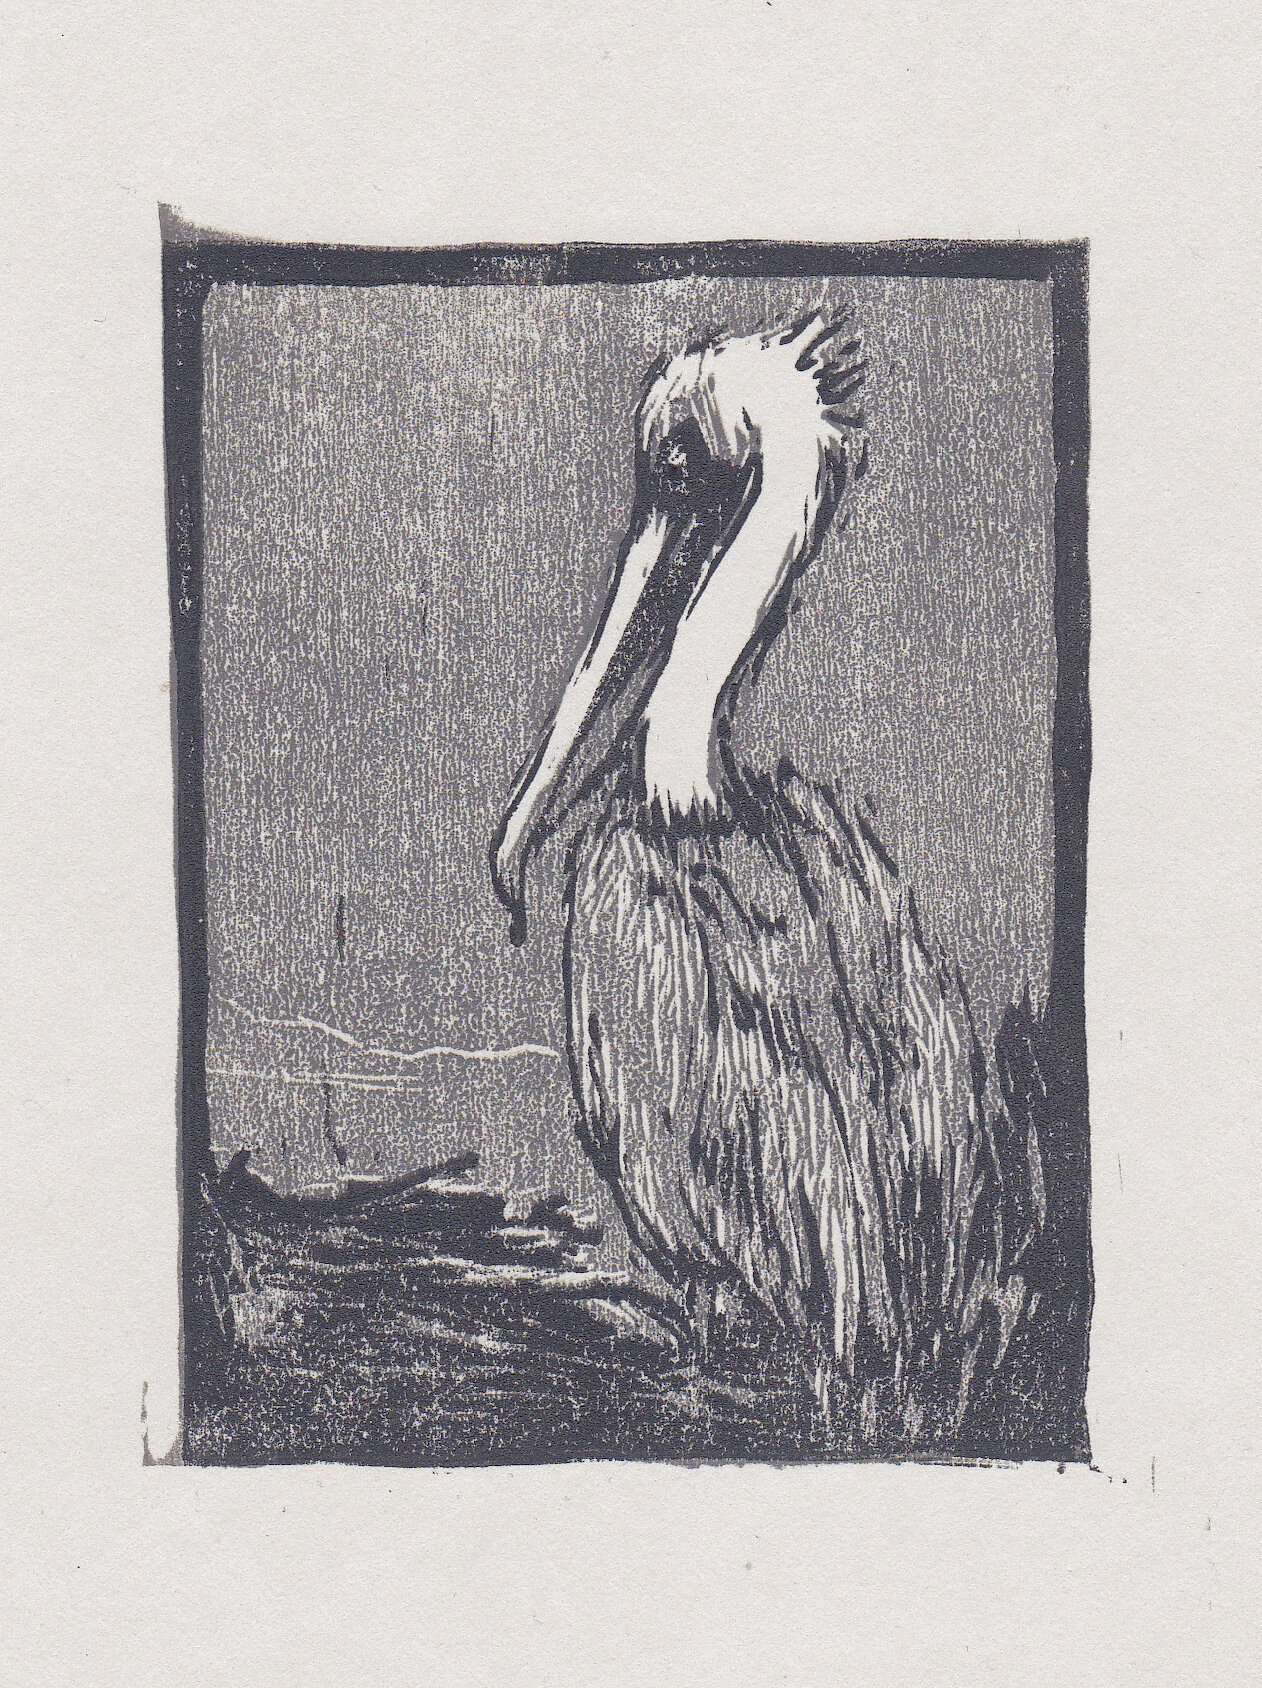   brown pelican  woodblock print edition of 40 3x4" 2013   purchase  